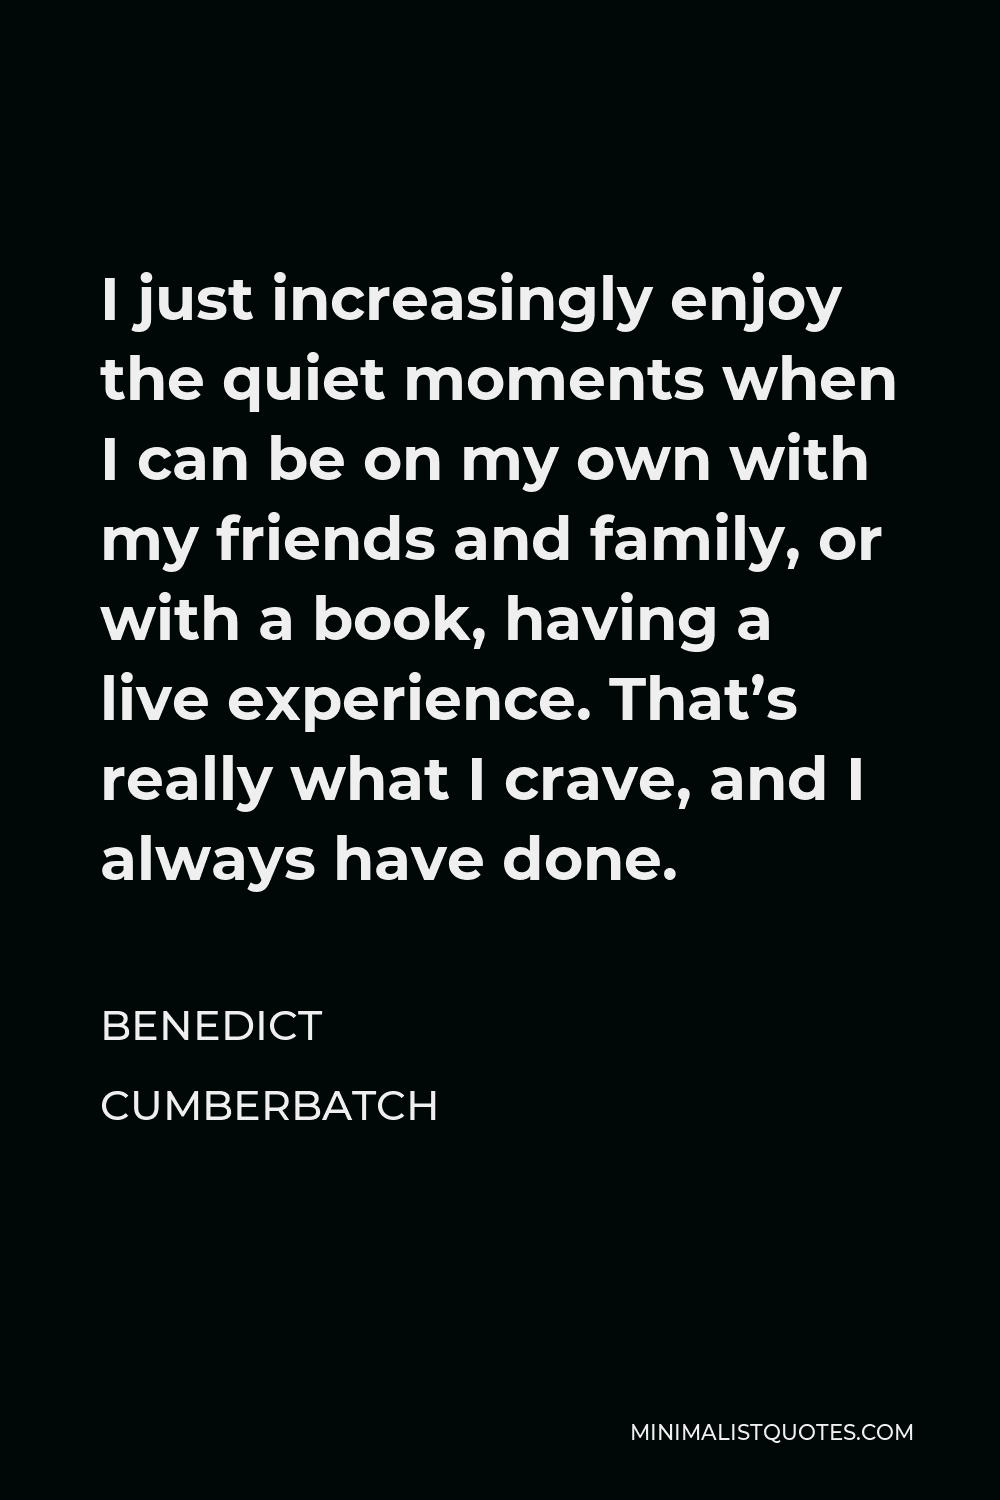 Benedict Cumberbatch Quote - I just increasingly enjoy the quiet moments when I can be on my own with my friends and family, or with a book, having a live experience. That’s really what I crave, and I always have done.